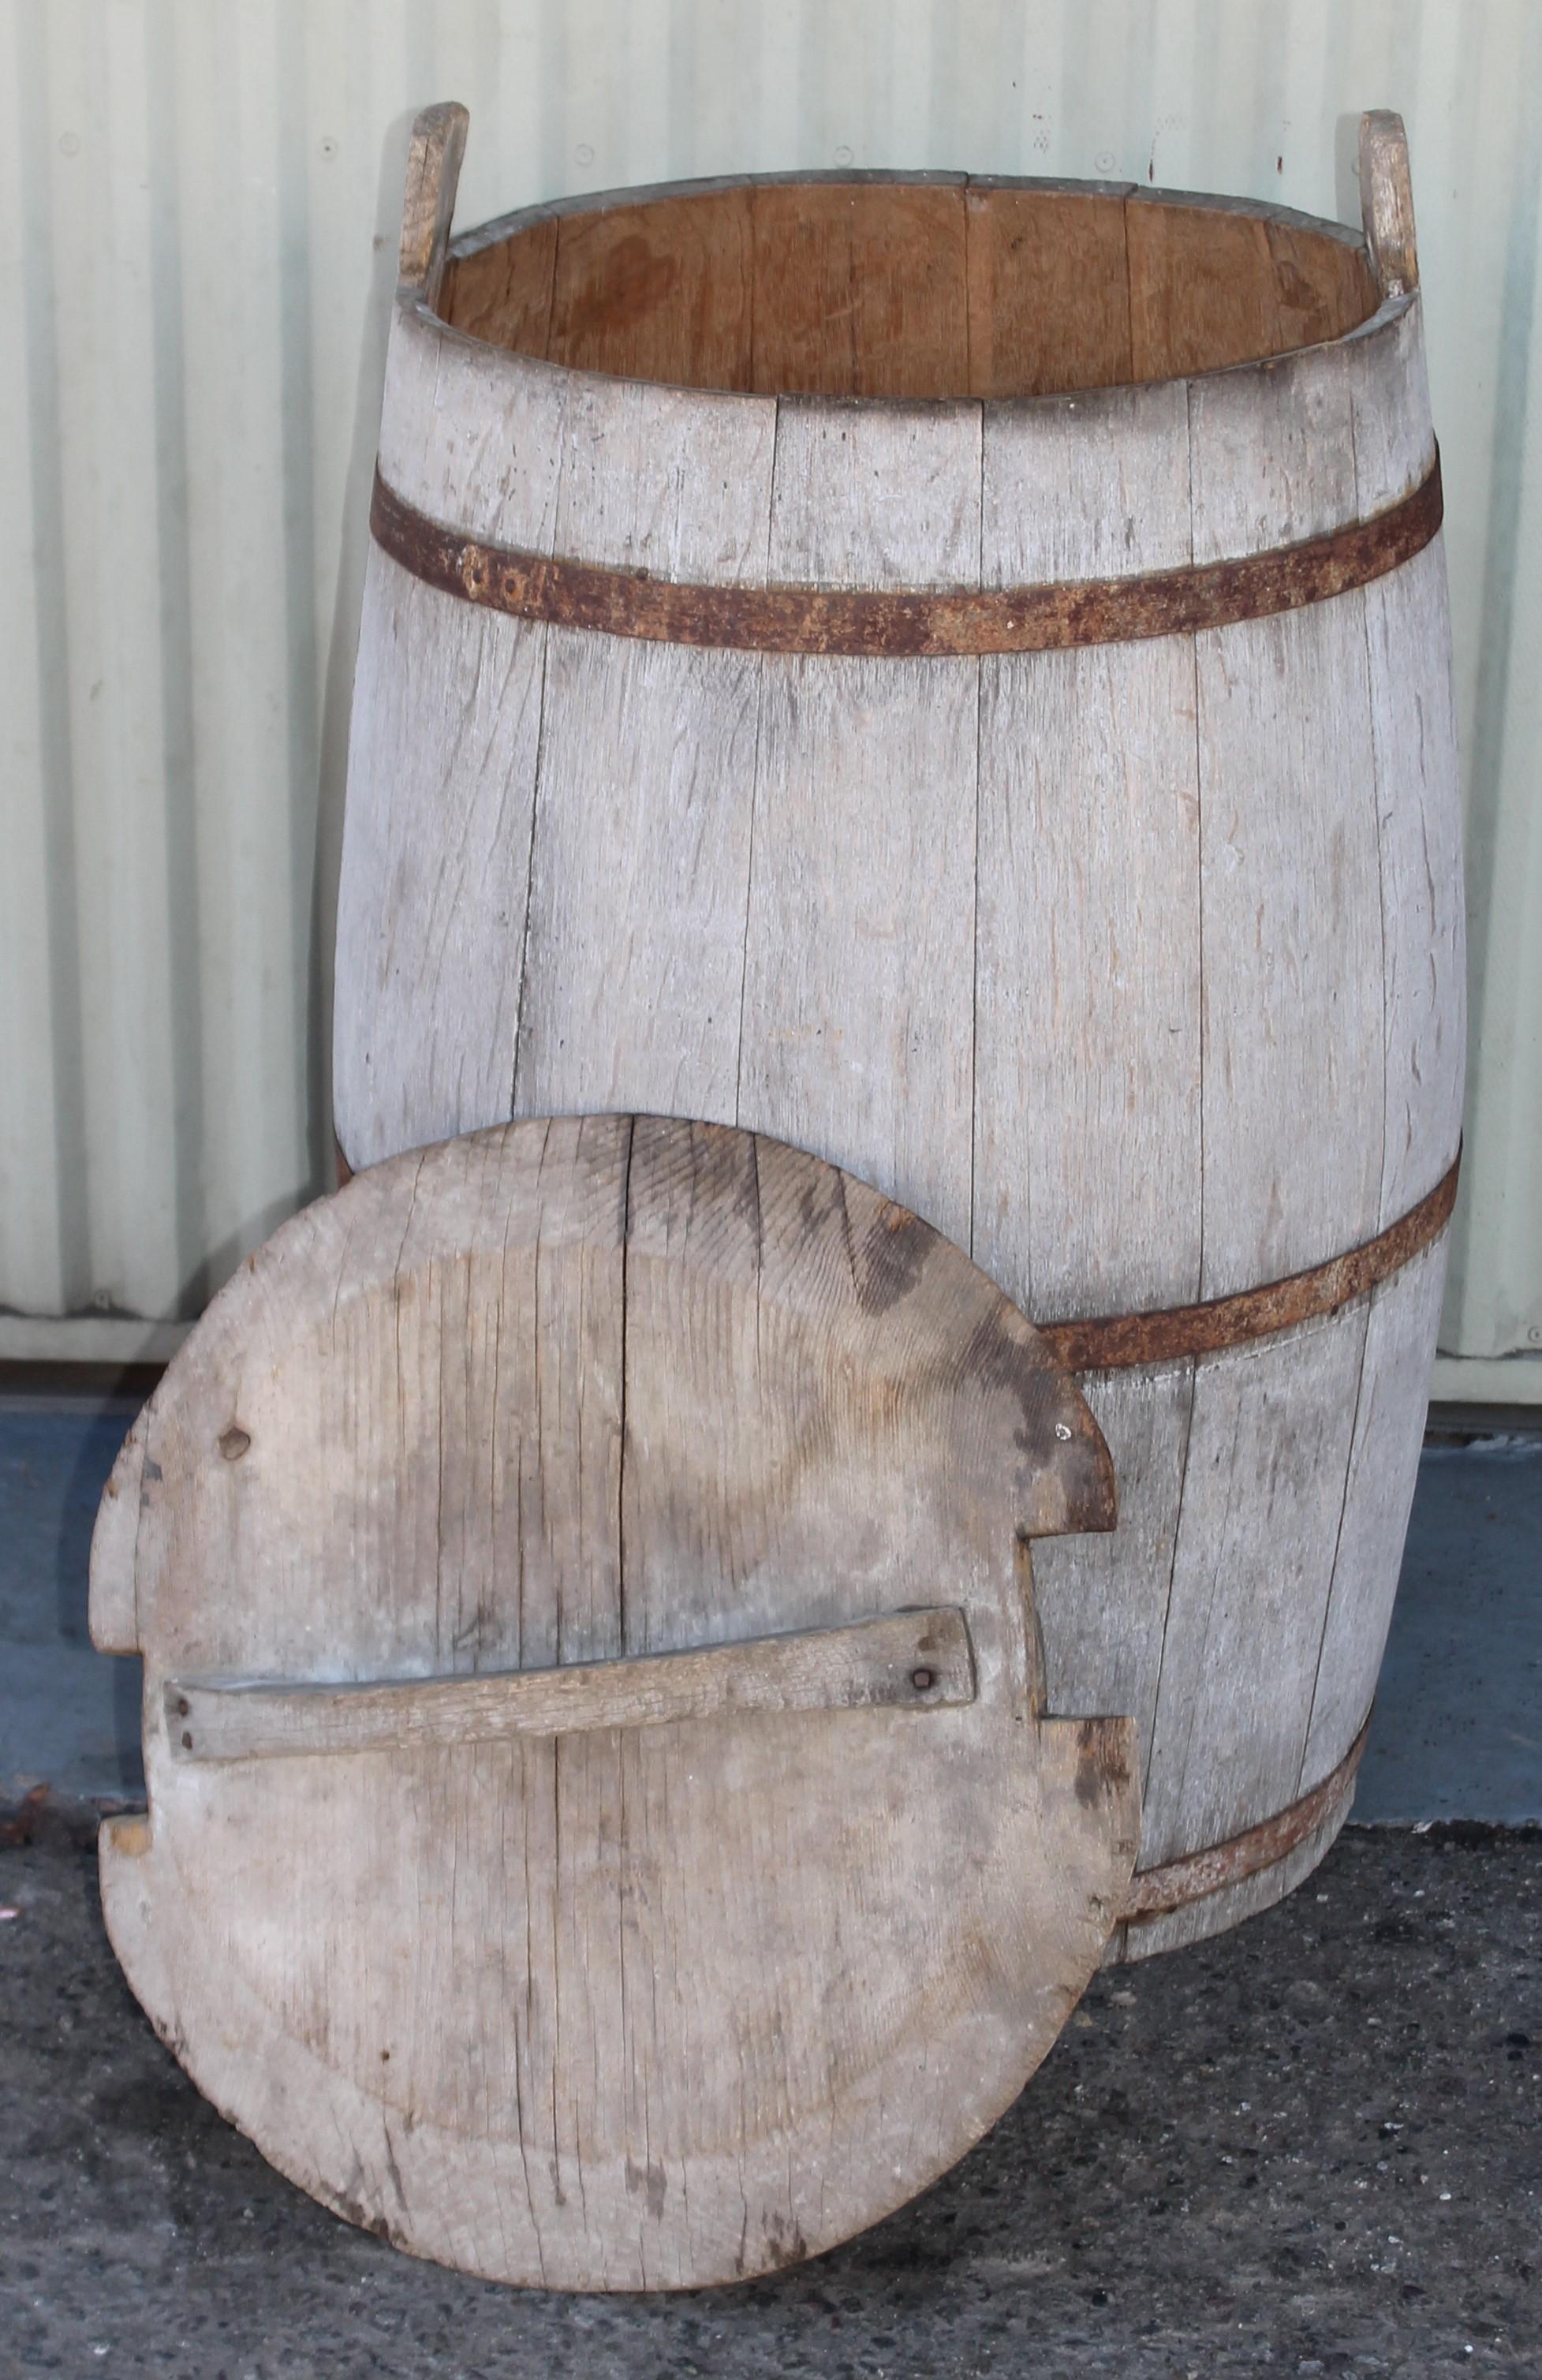 19thc early hand made farmhouse barrel used for storing feed or grains. The barrel has a grey wash of paint and iron straps in tight sturdy condition.